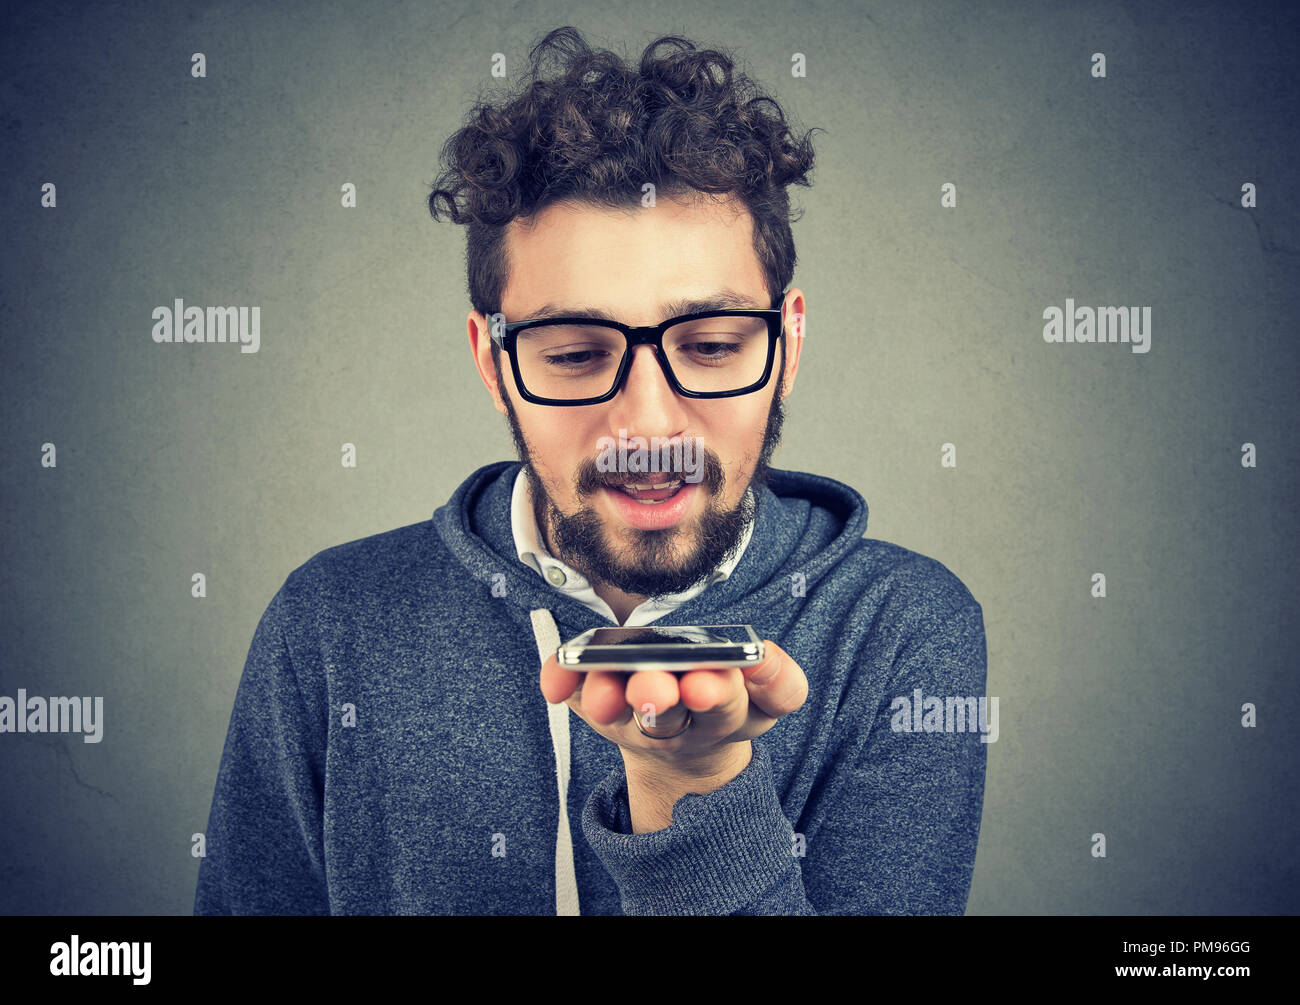 Hipster man using a smart phone voice recognition function isolated on wall background Stock Photo